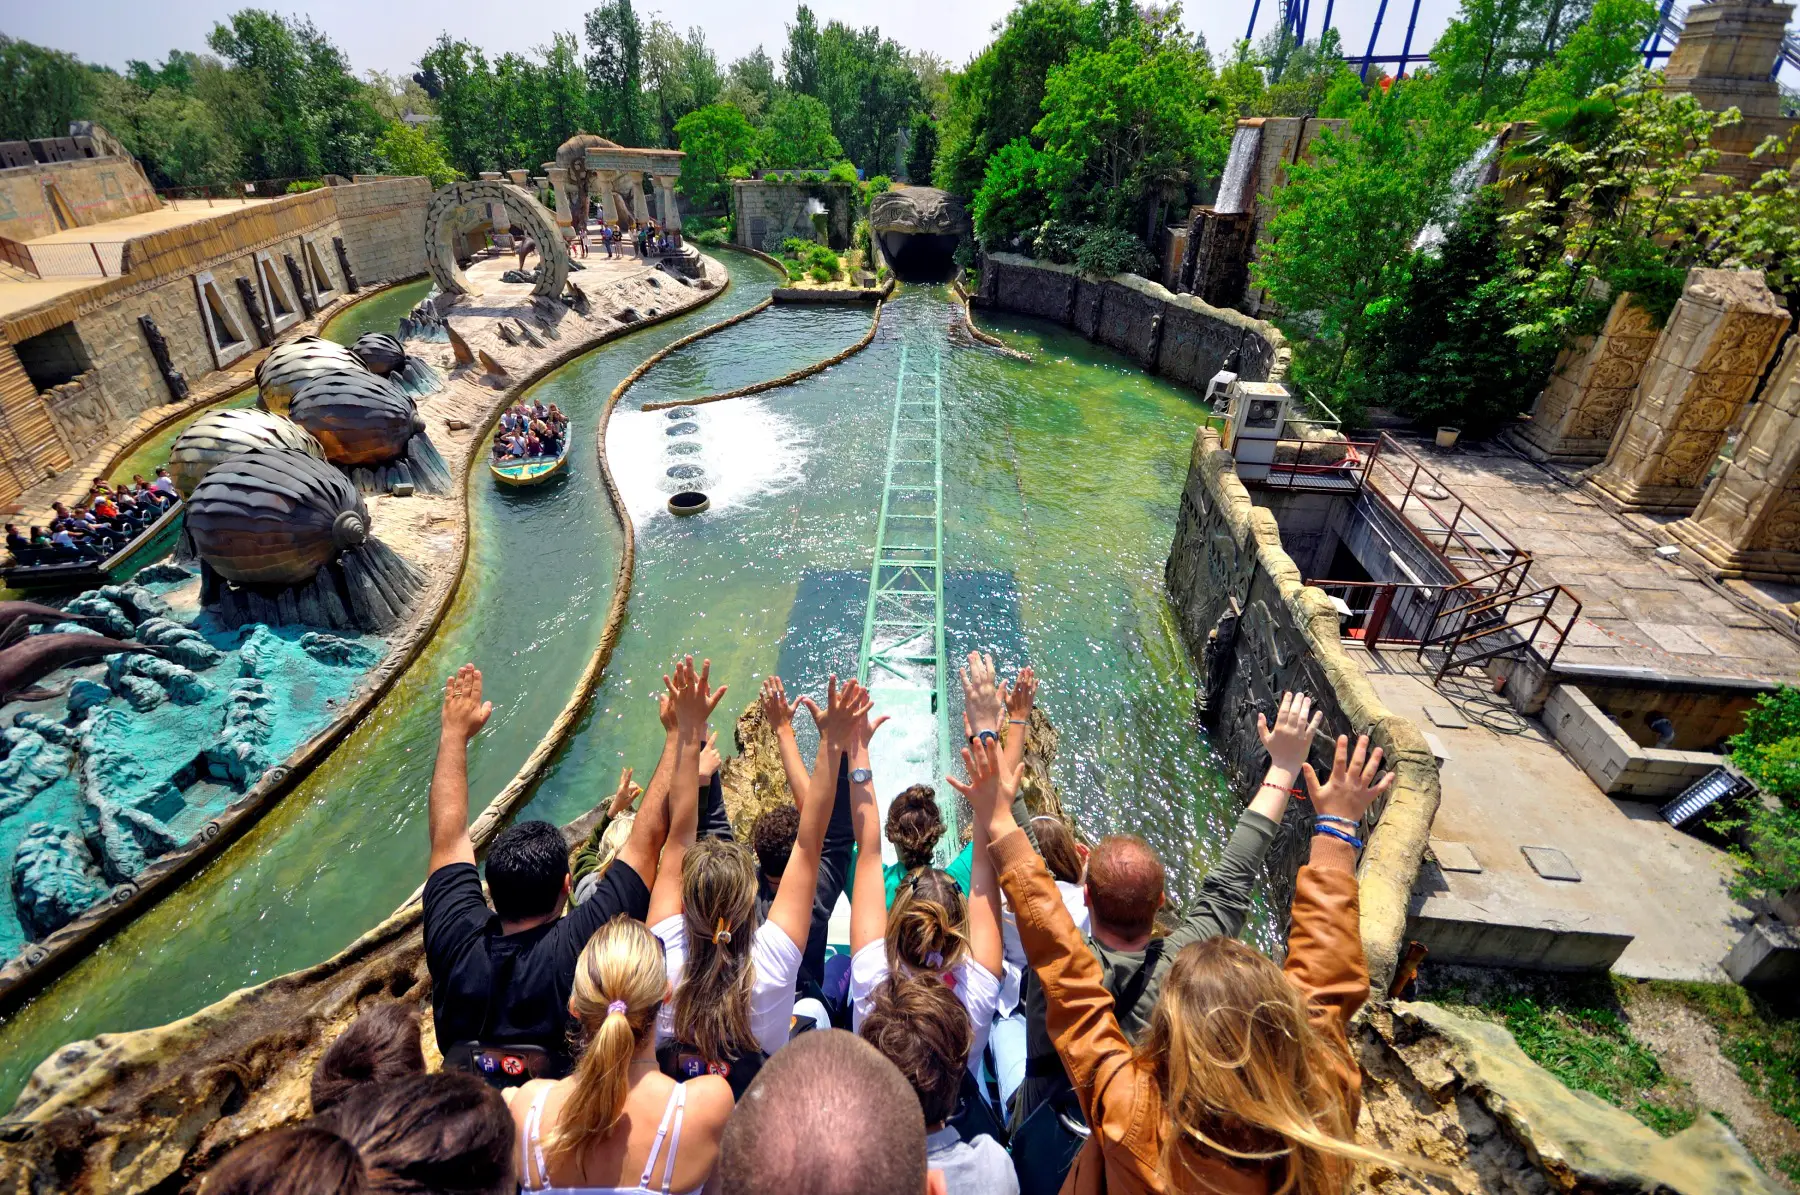 Visitors riding the Escape from Atlantis water ride at Gardaland Resort in Italy